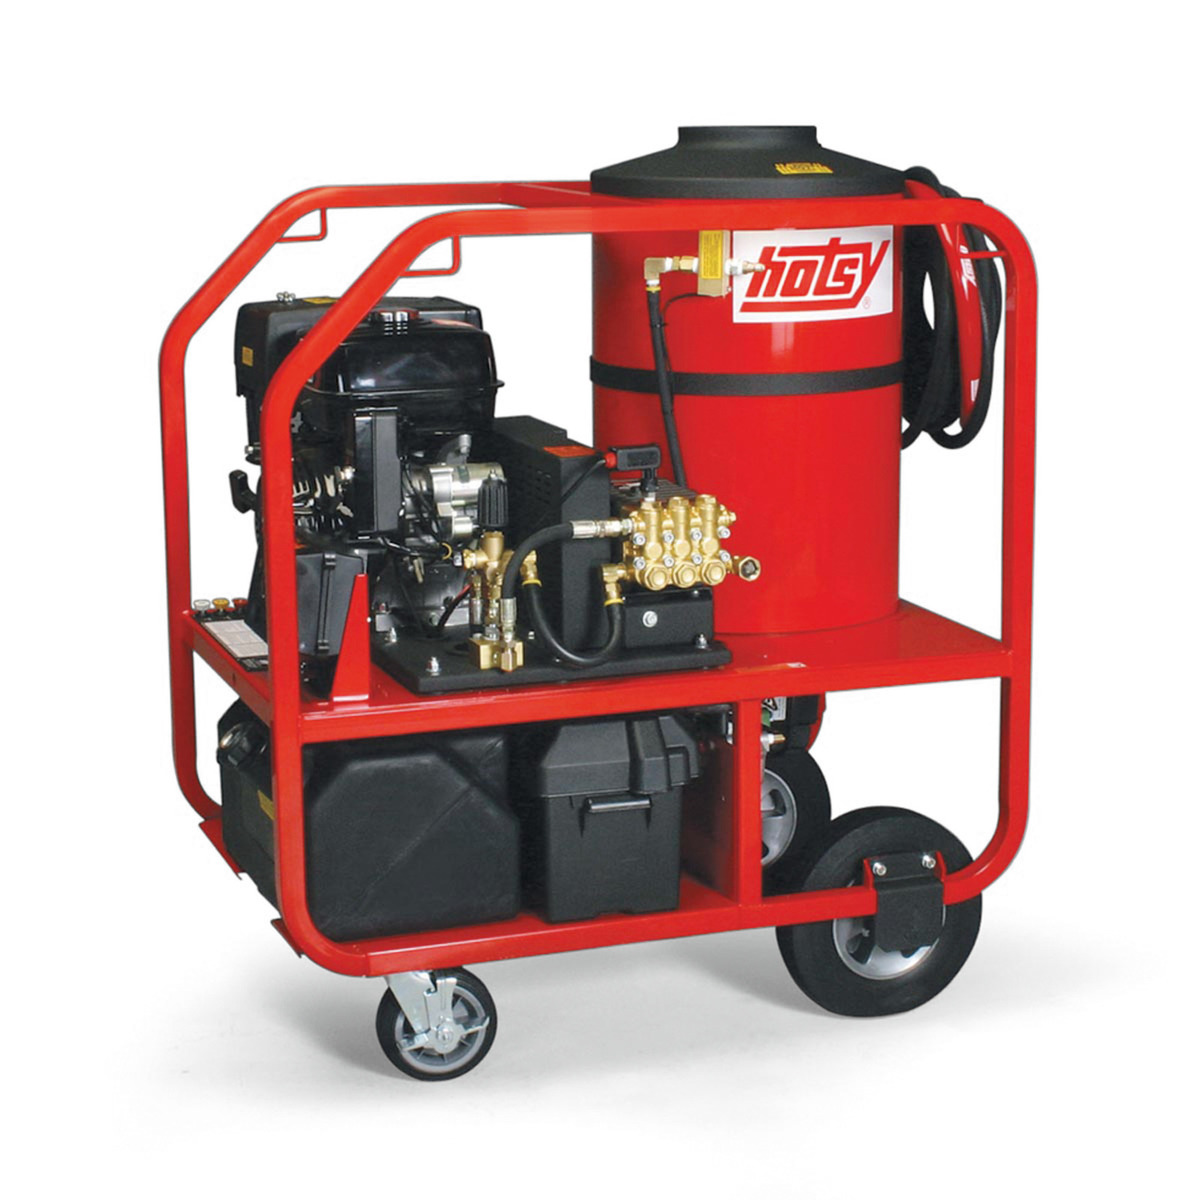 Hotsy Gas Engine Belt-Drive Series – Portable / Stationary Gas/Diesel Hot Water Pressure Washers